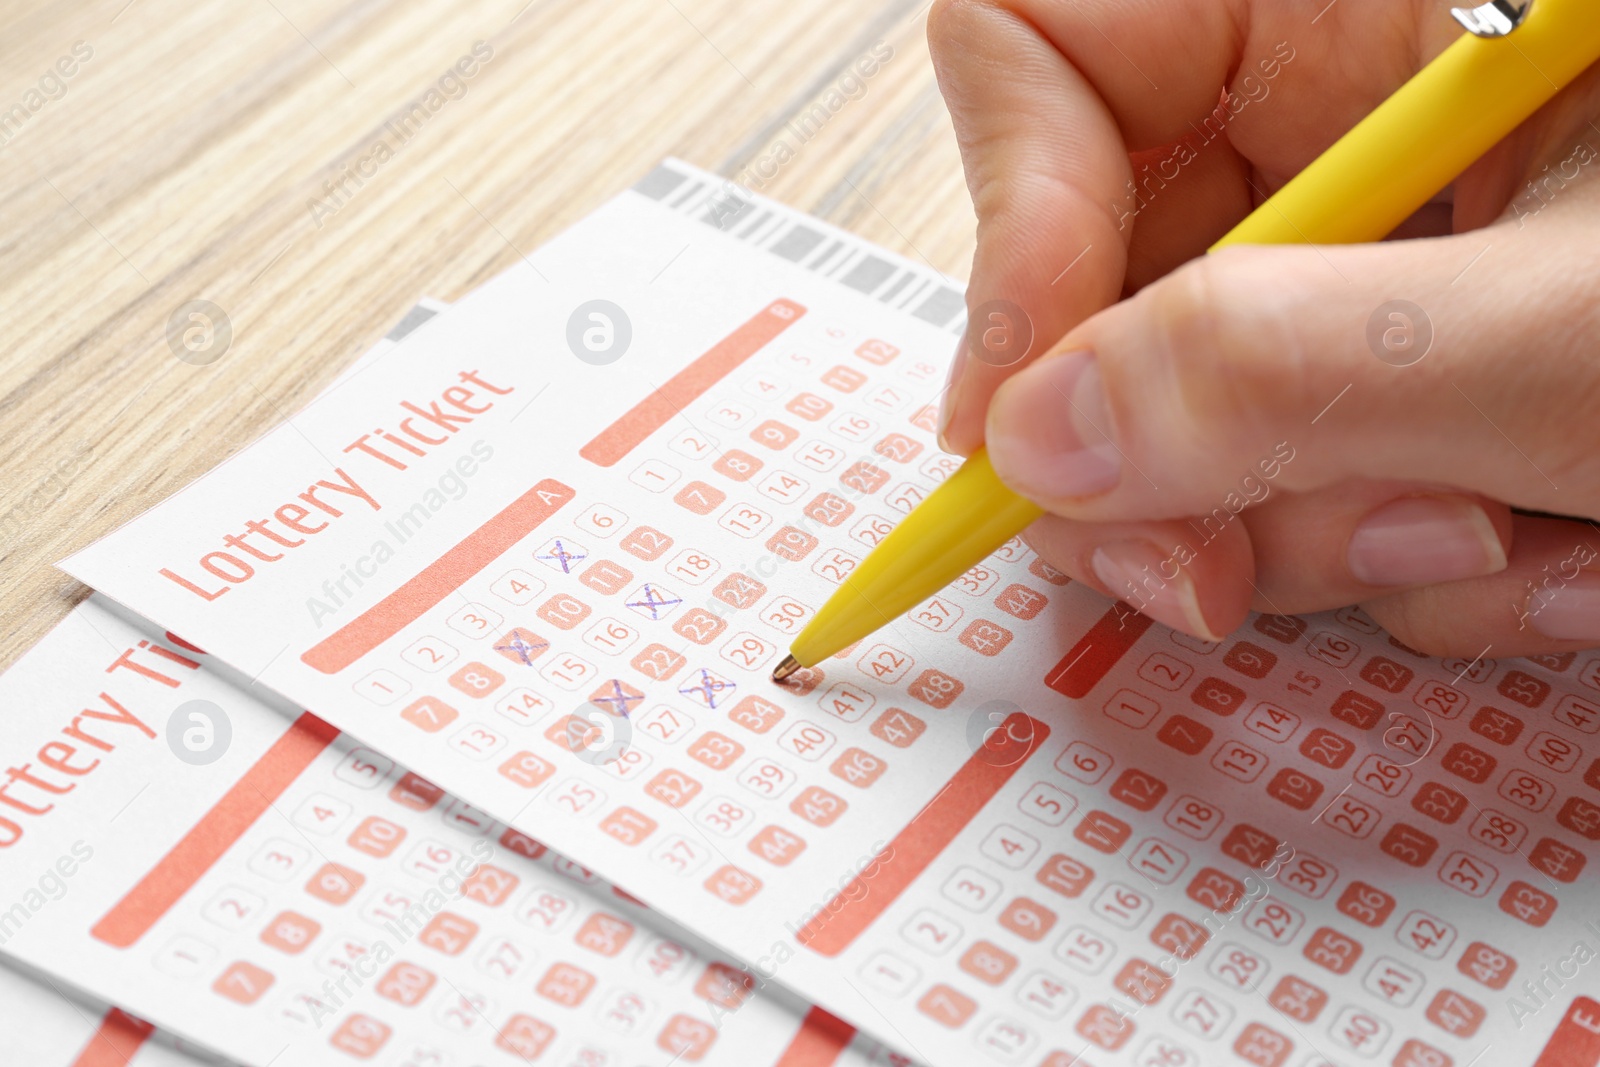 Photo of Woman filling out lottery tickets with pen on wooden table, closeup. Space for text